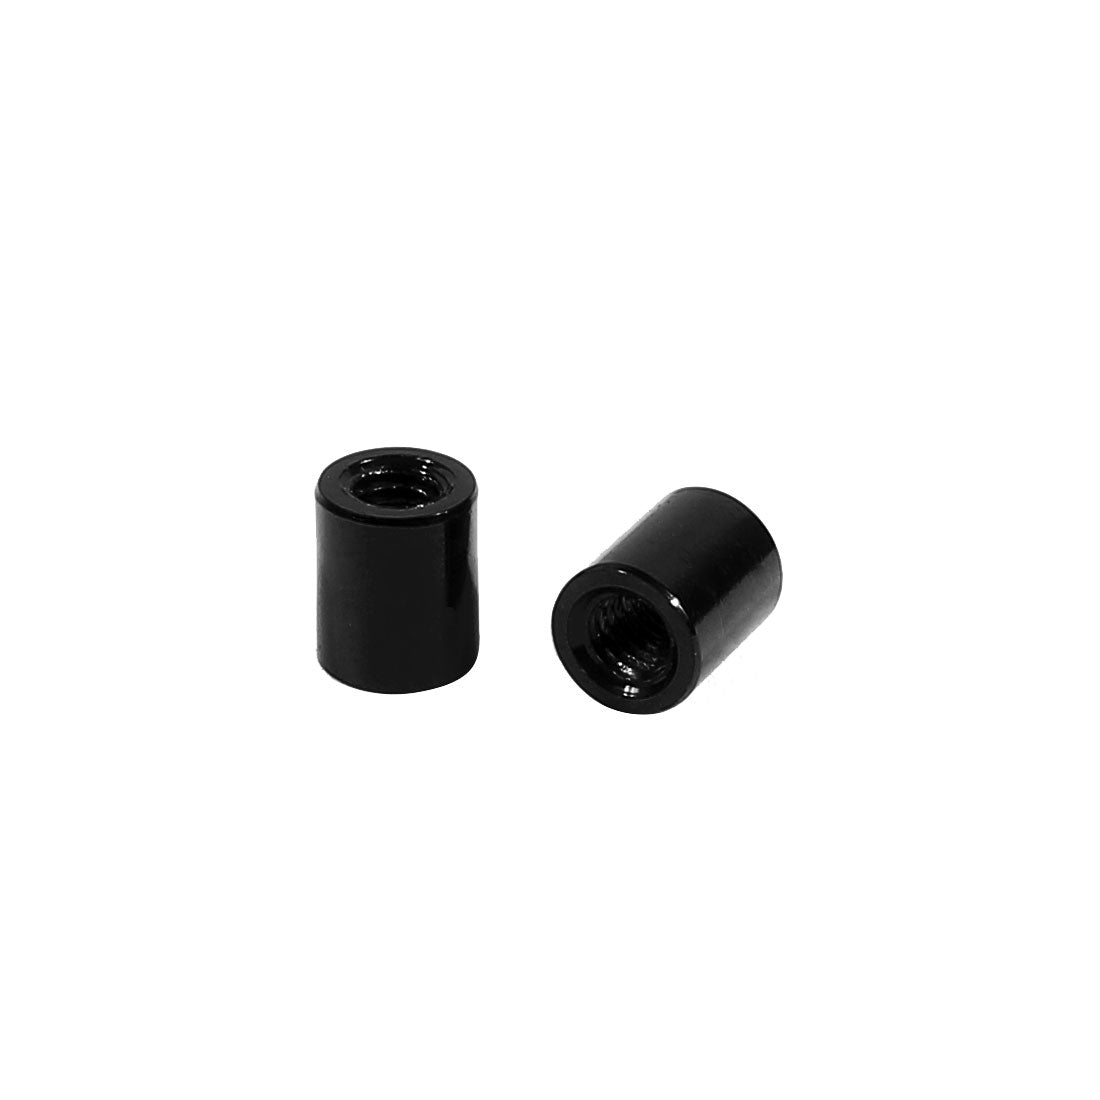 uxcell Uxcell 5Pcs M3 x 6mm Round Aluminum Column Alloy Standoff Spacer Stud Fastener for Quadcopter Black